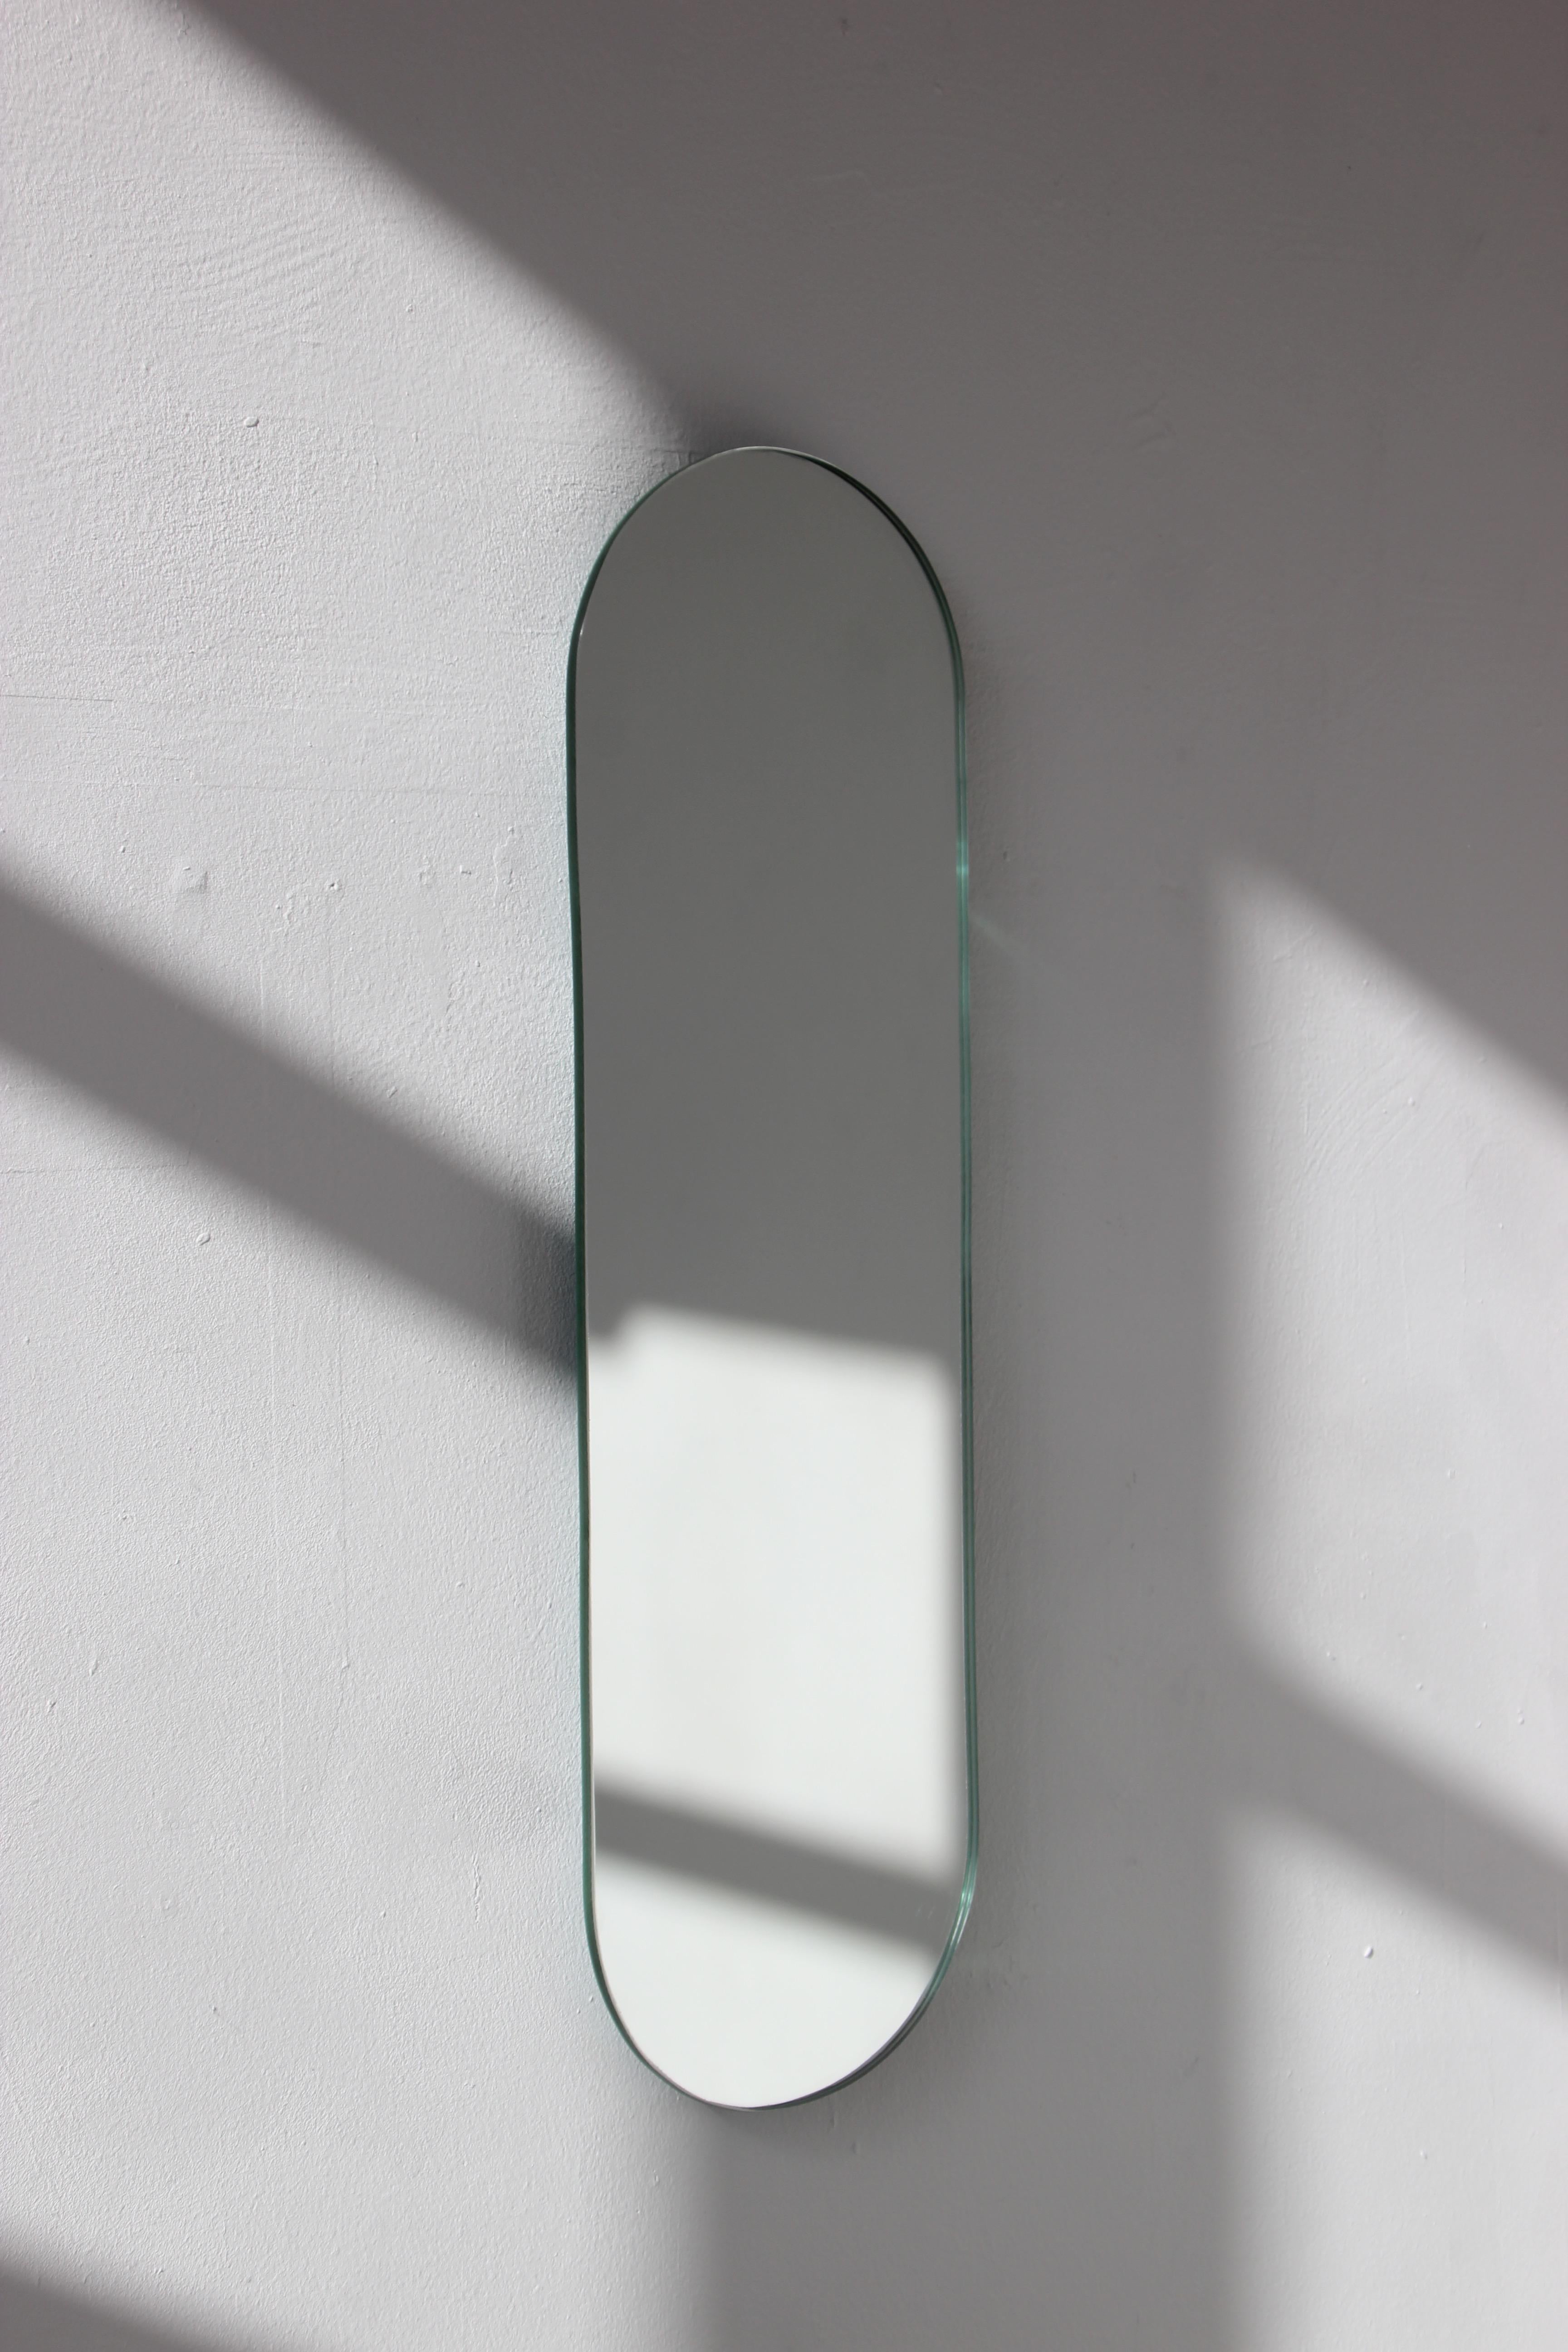 Minimalist capsule shaped frameless mirror. Fitted with a specialist hanging system that allows for the mirror to be hung in two different positions. Designed and handcrafted in London, UK.

The images show a small size mirror, measuring 27cm x